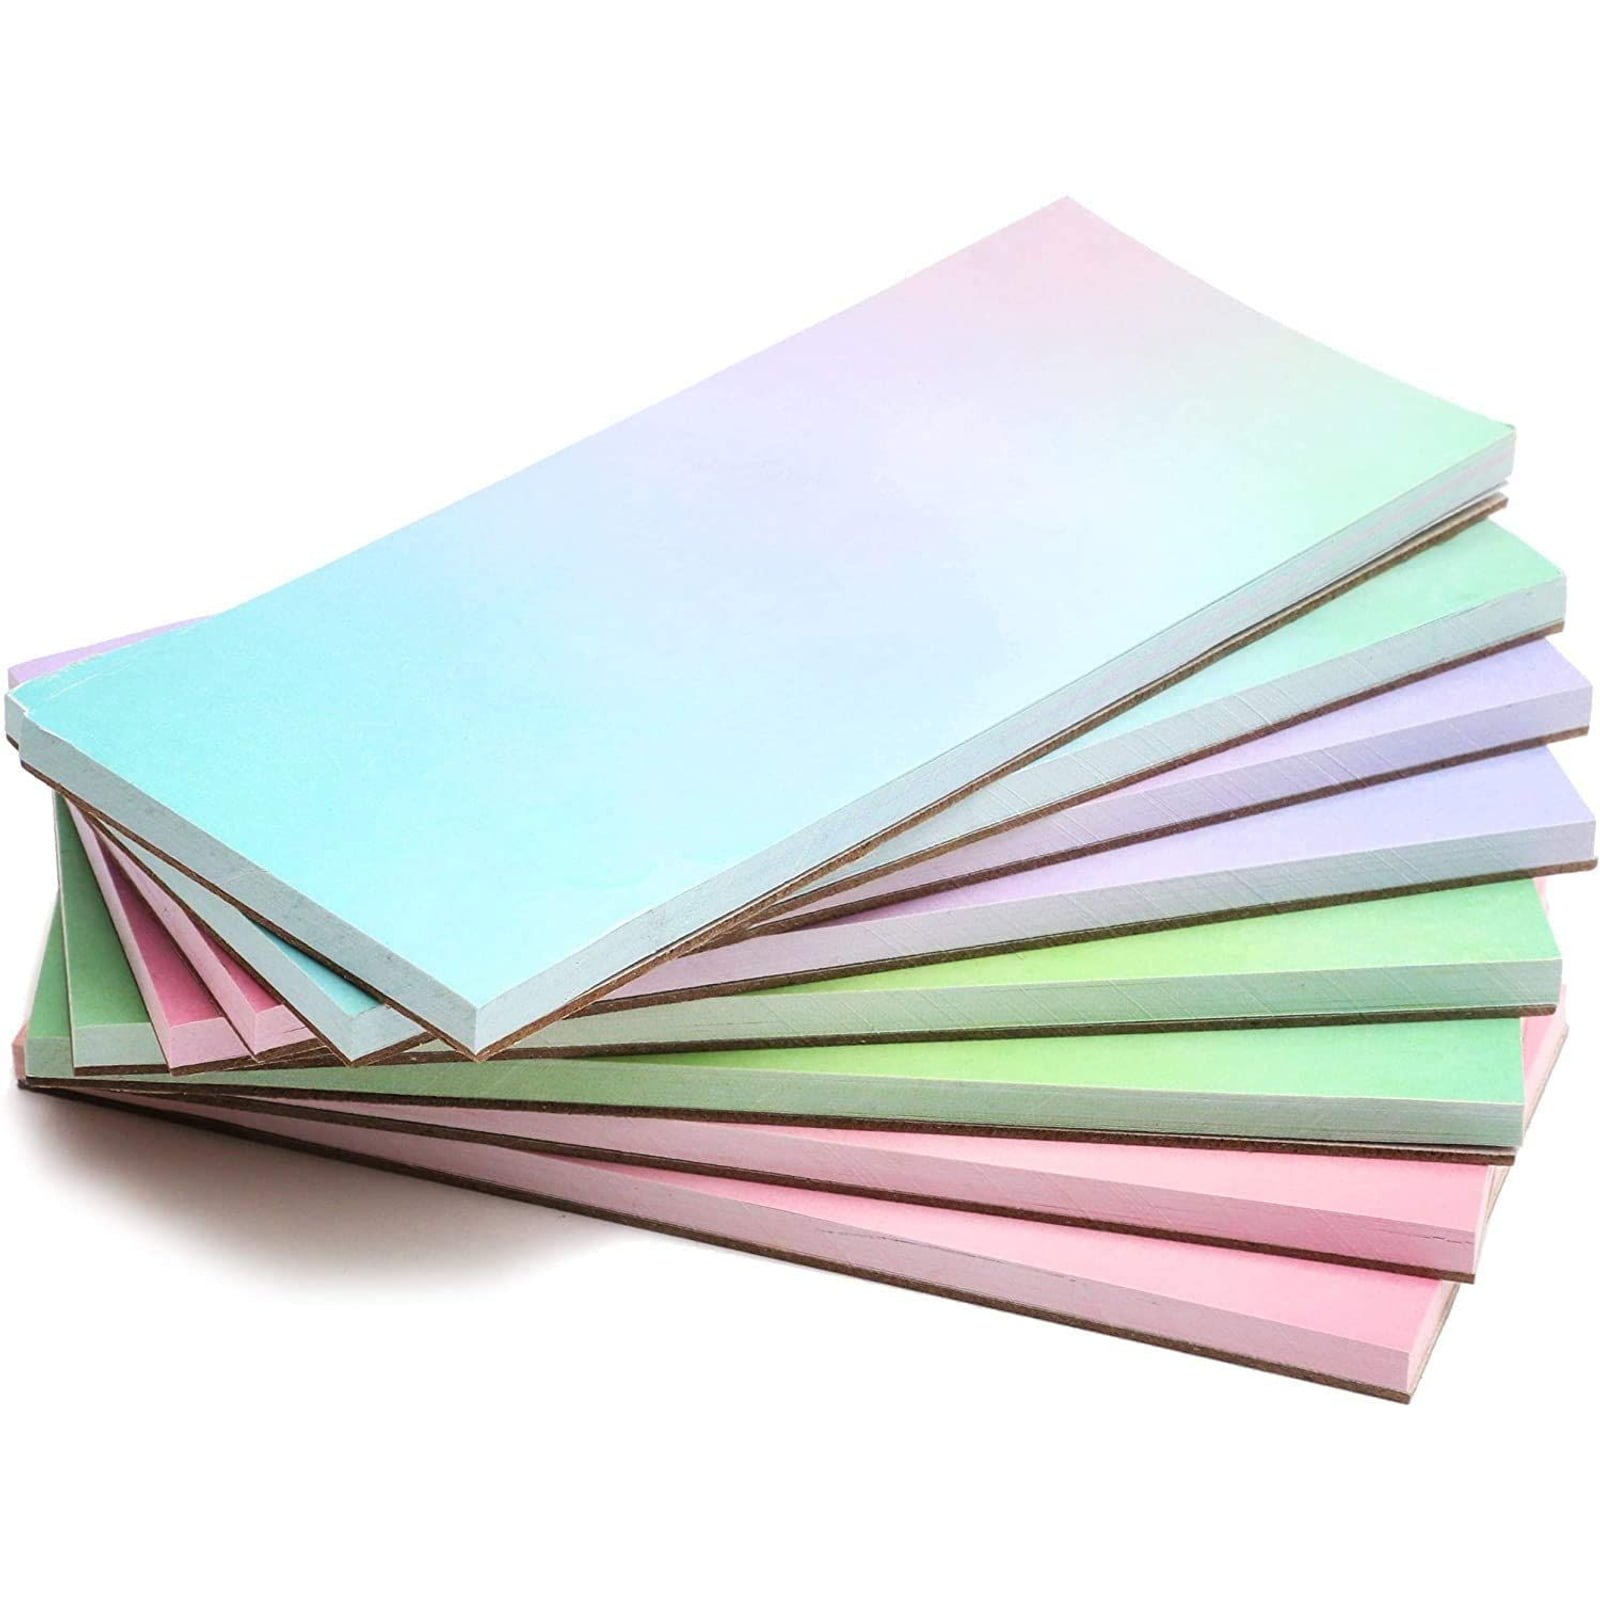 Four Colors Wheel Series Sticky Notes Memo Pad Diary Stationery 80 Pages cute 